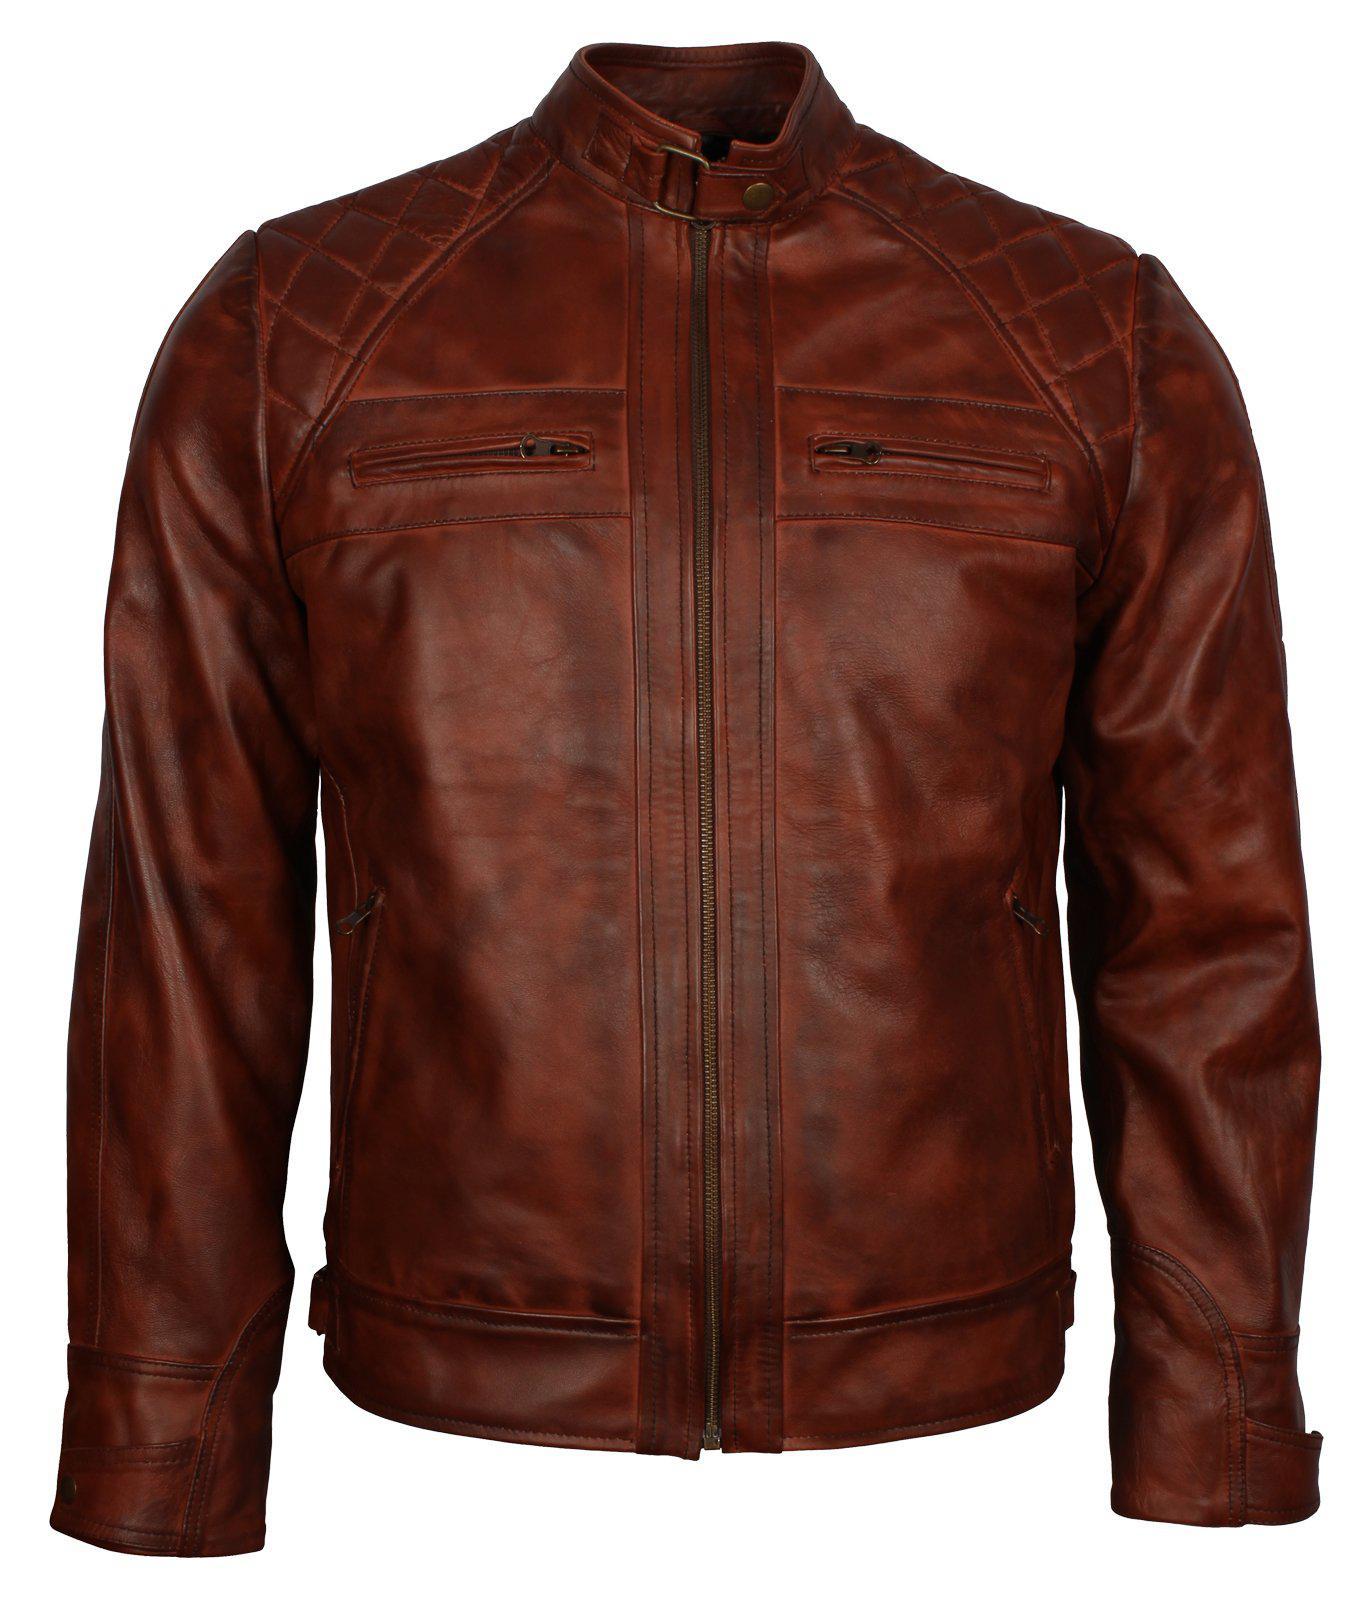 Cafe Racer Men's Brown Leather Jacket Diamond Quilted